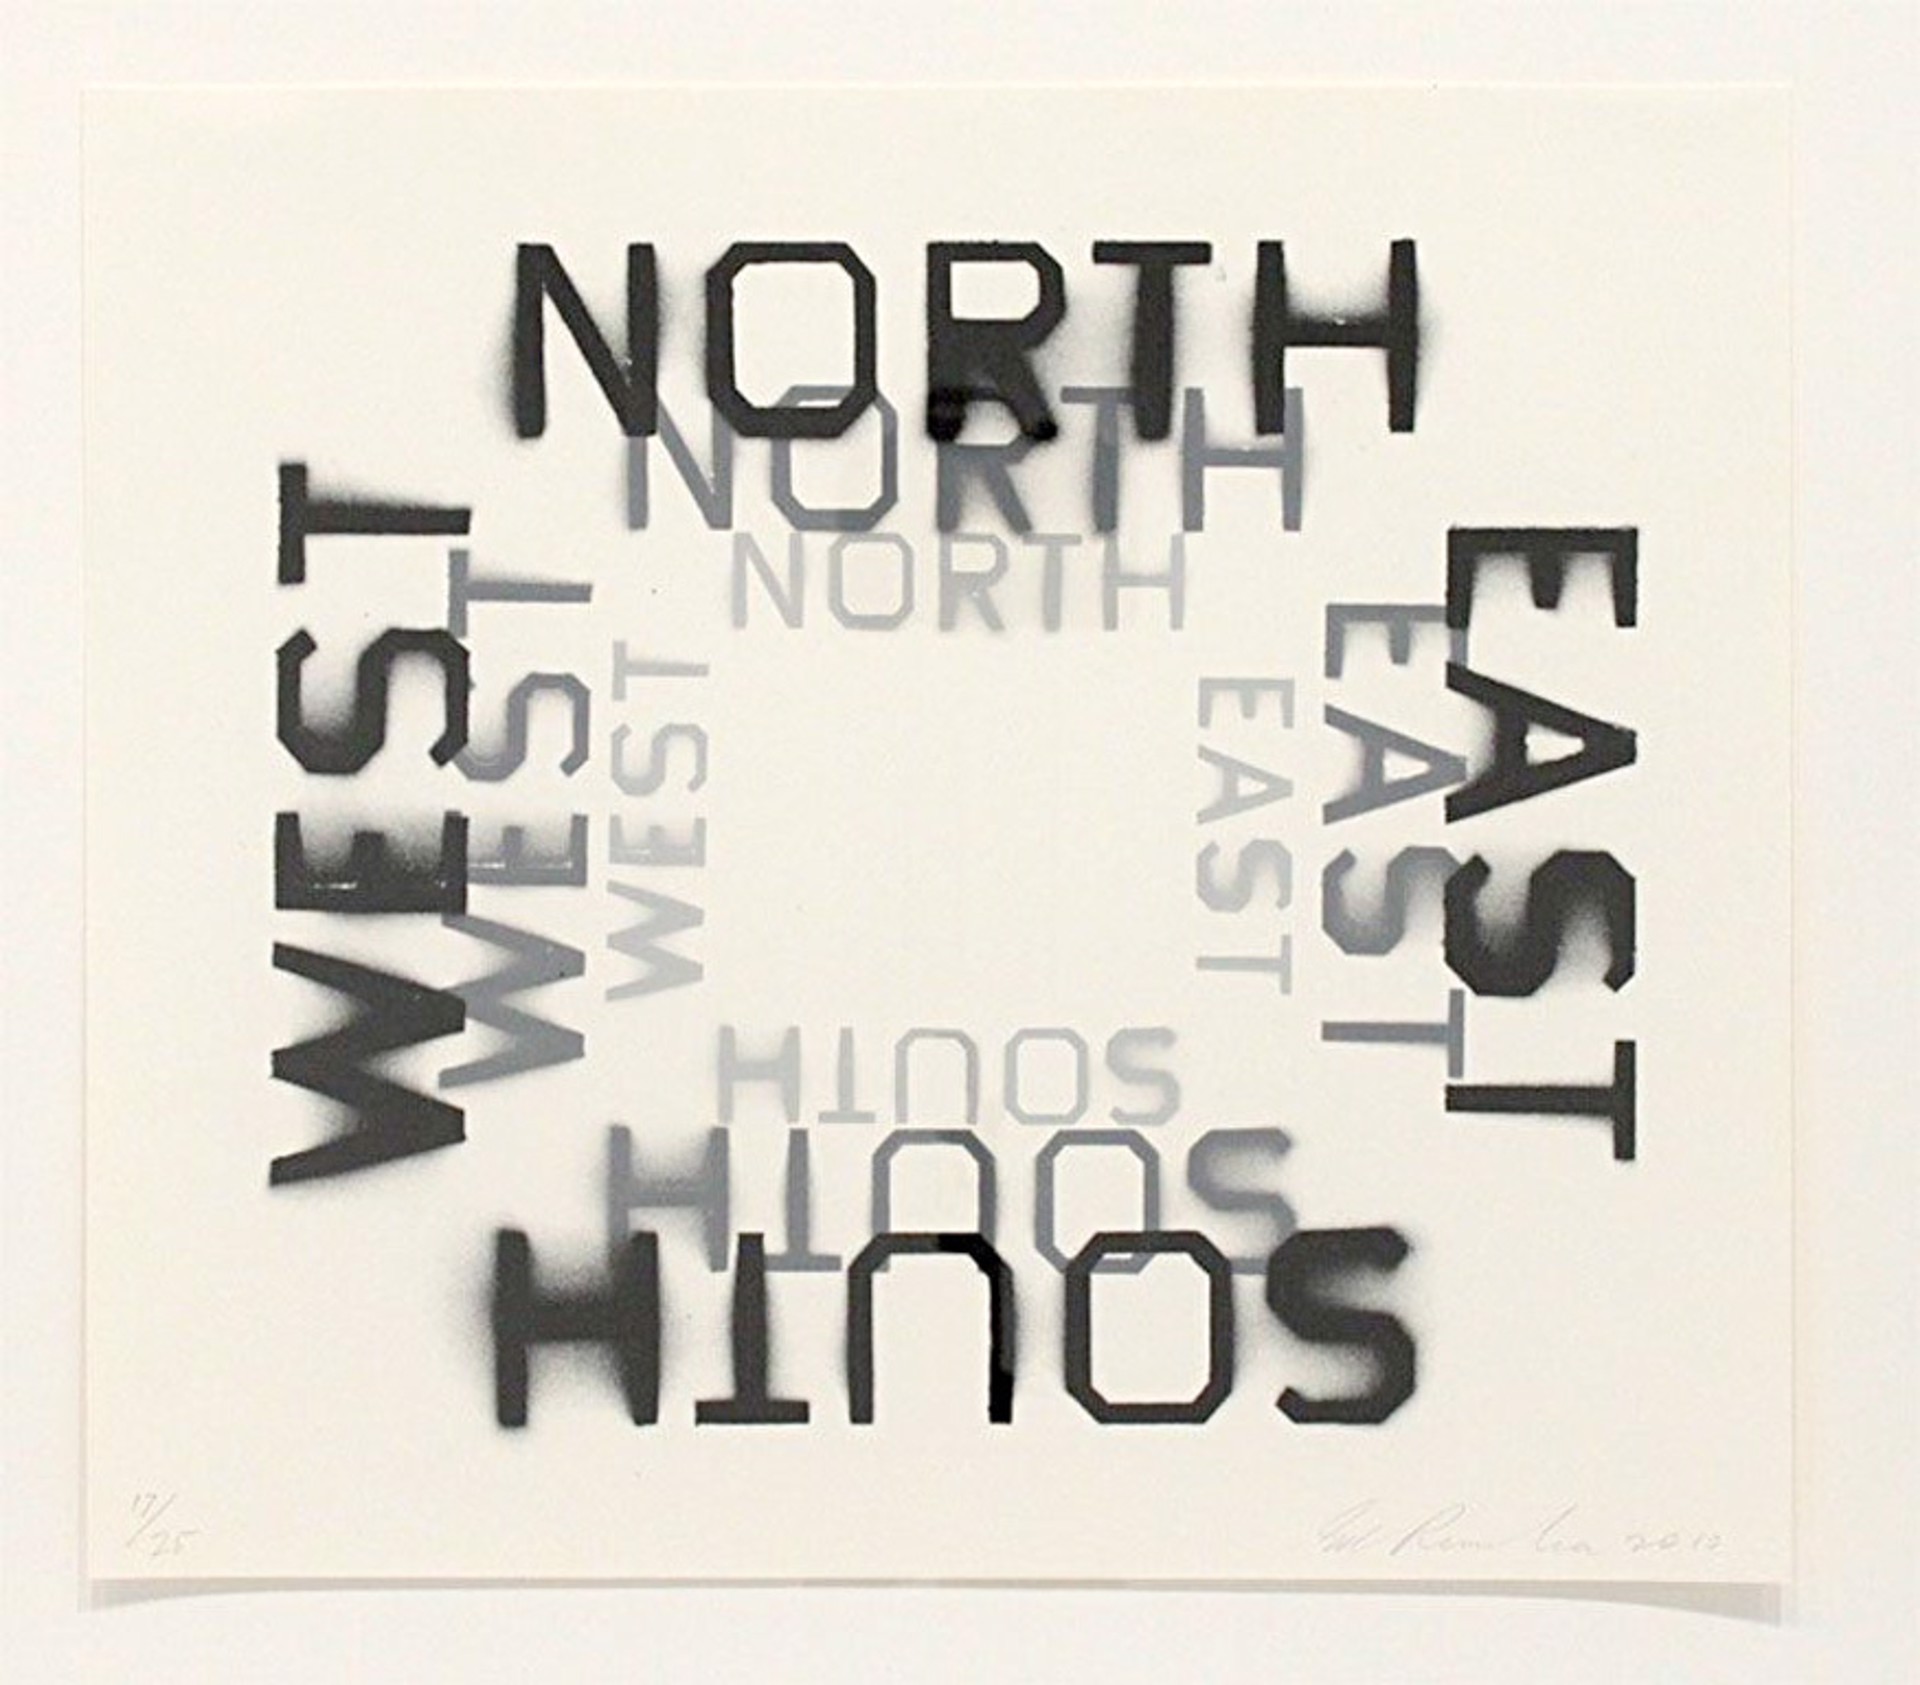 All Points (Black State) by Ed Ruscha